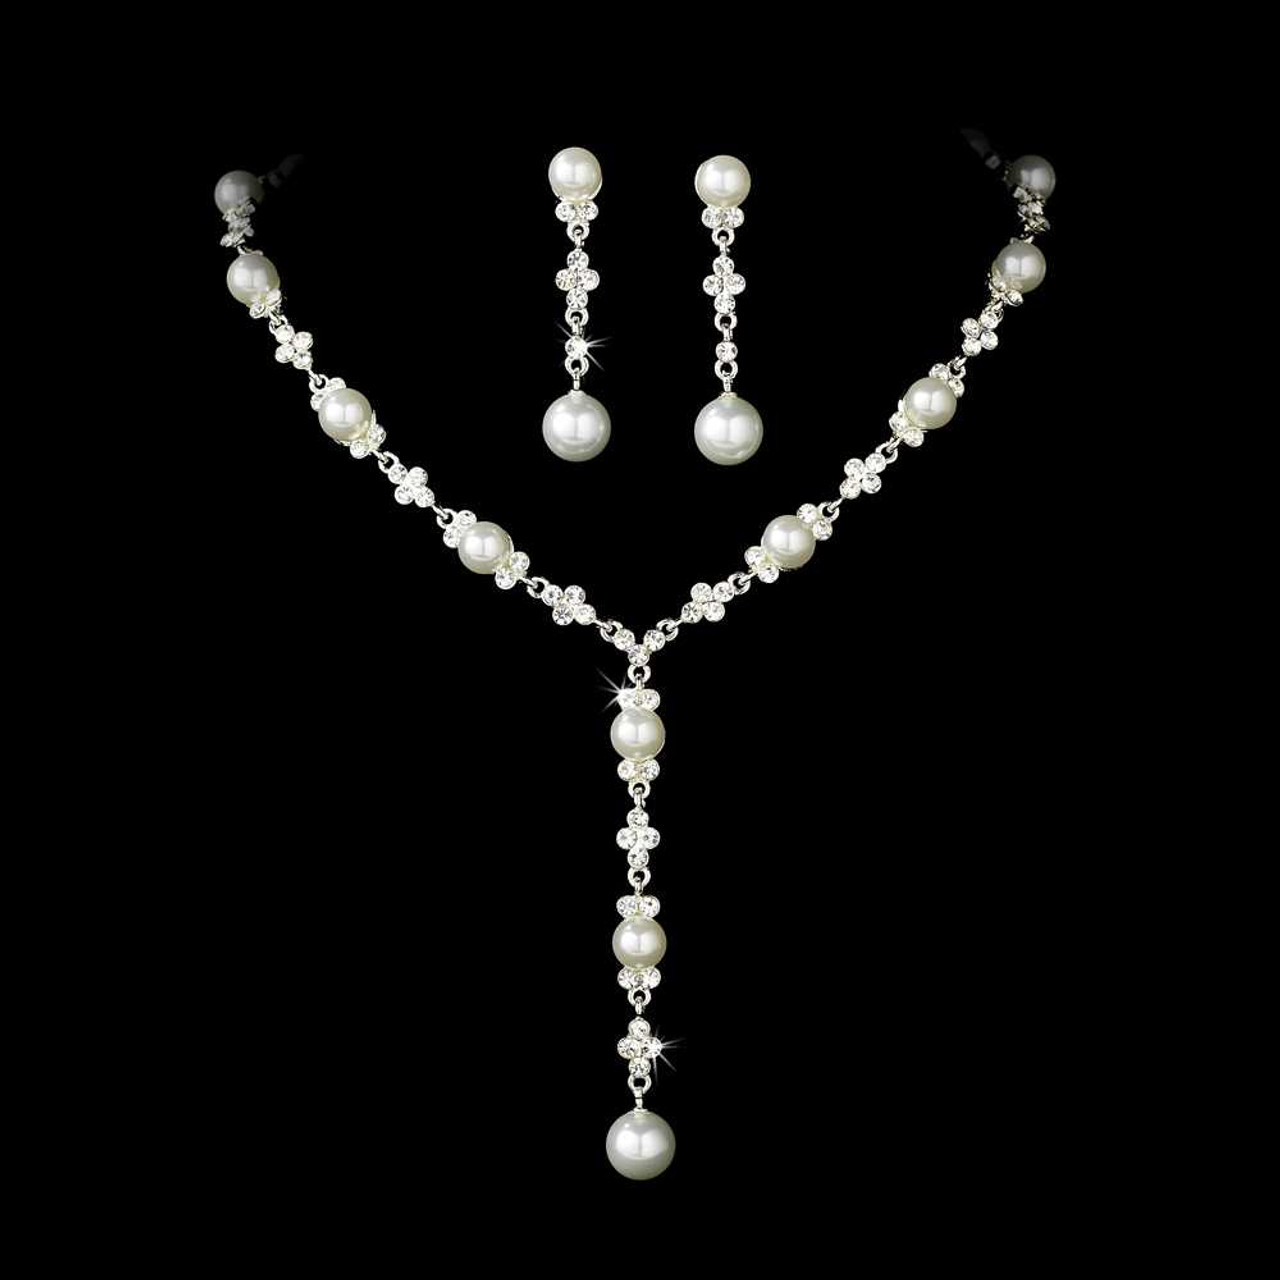 Diamond & Pearl Vines Necklace (156.06 ct Pearls & Diamonds) in White –  Beauvince Jewelry